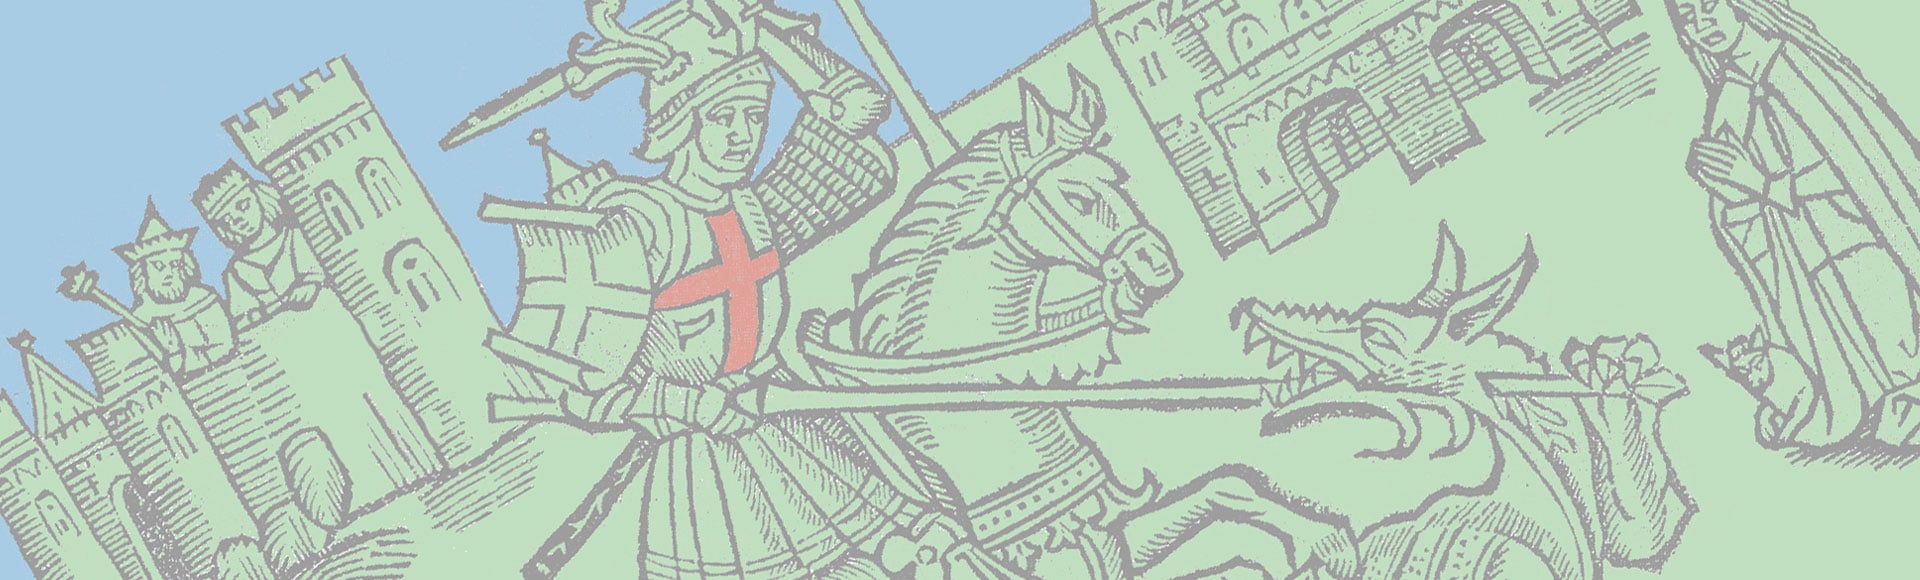 Who was St. George?